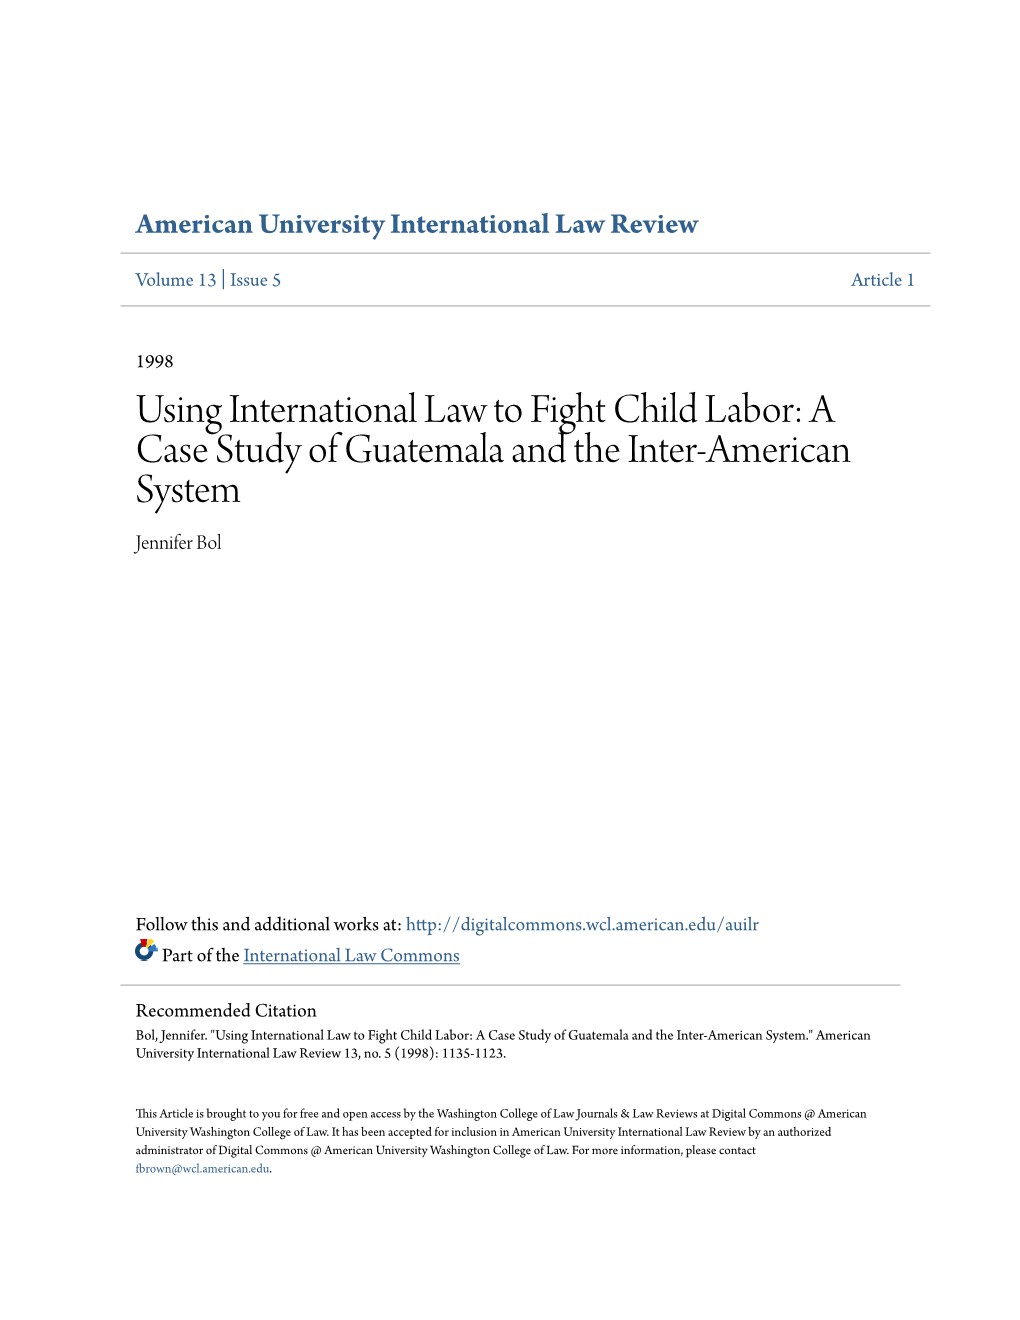 Using International Law to Fight Child Labor: a Case Study of Guatemala and the Inter-American System Jennifer Bol